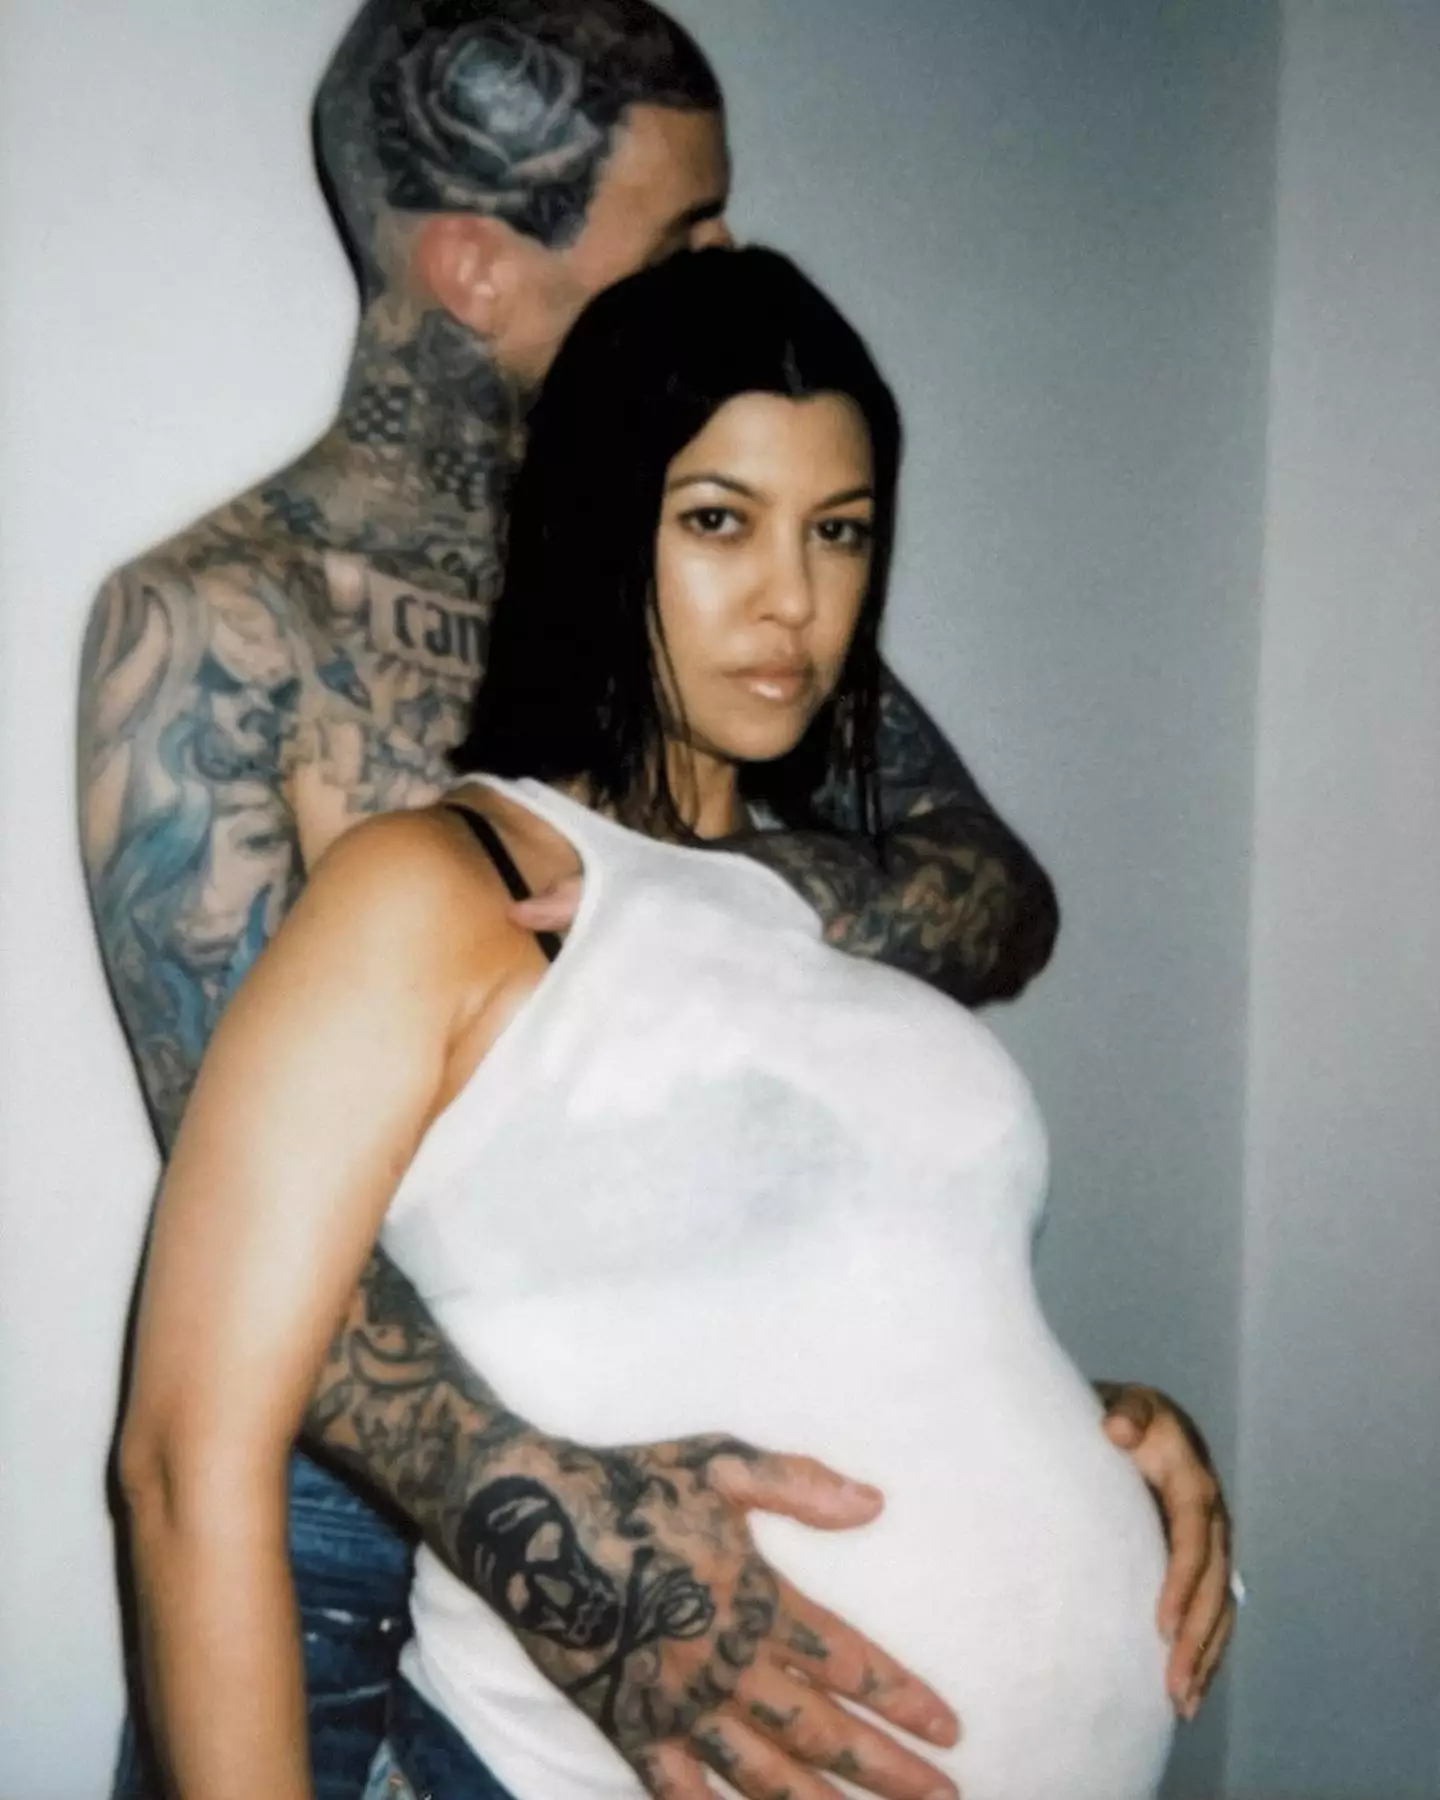 Kourtney shared a series of maternity pictures as a birthday tribute to Travis.